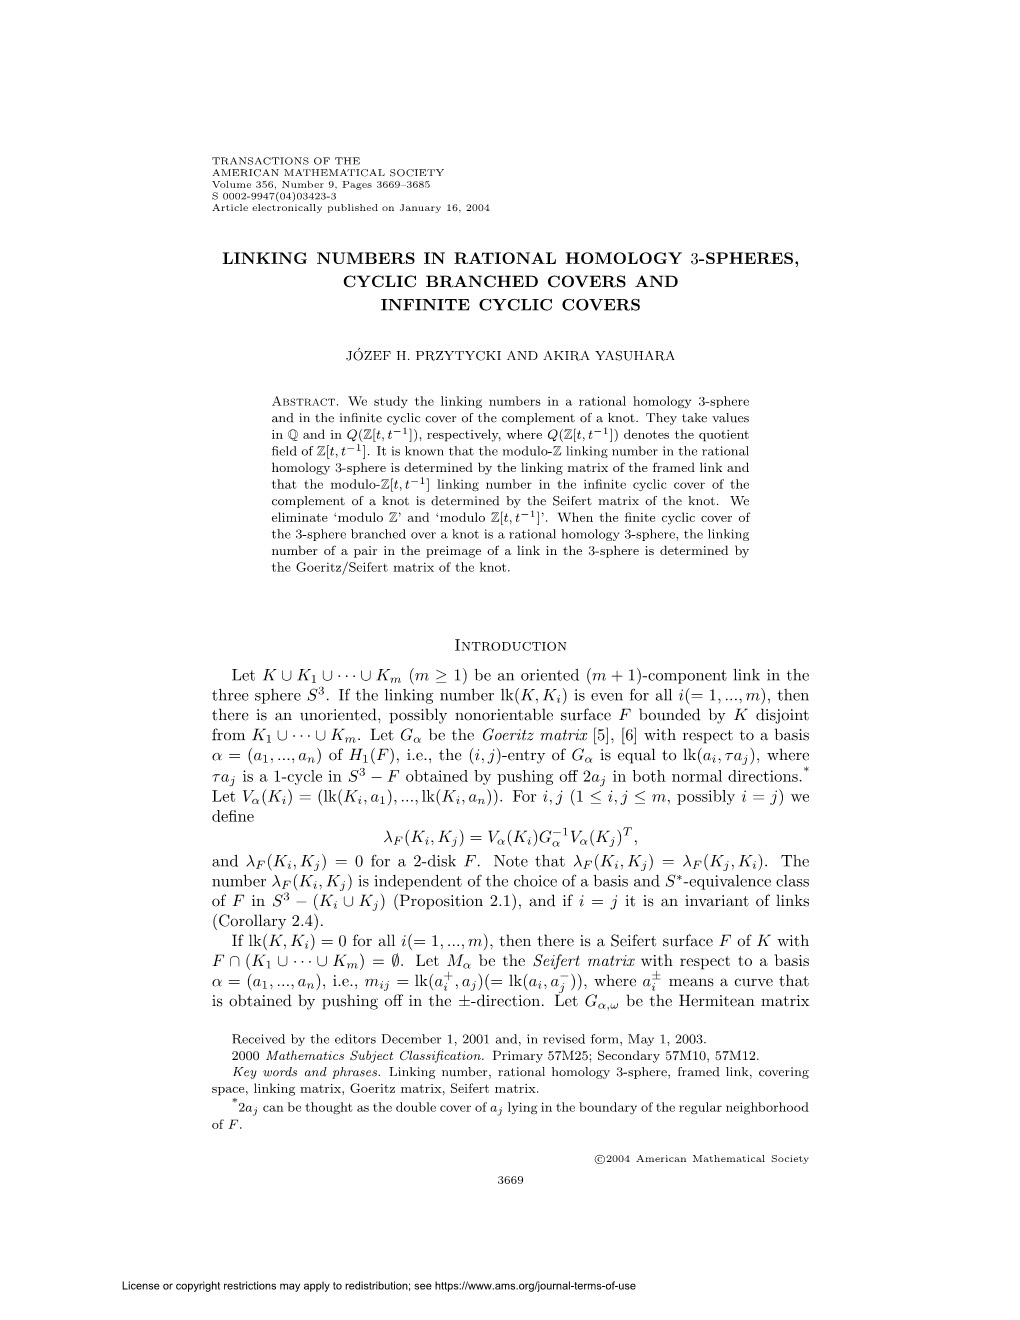 LINKING NUMBERS in RATIONAL HOMOLOGY 3-SPHERES, CYCLIC BRANCHED COVERS and INFINITE CYCLIC COVERS Introduction Let K ∪ K